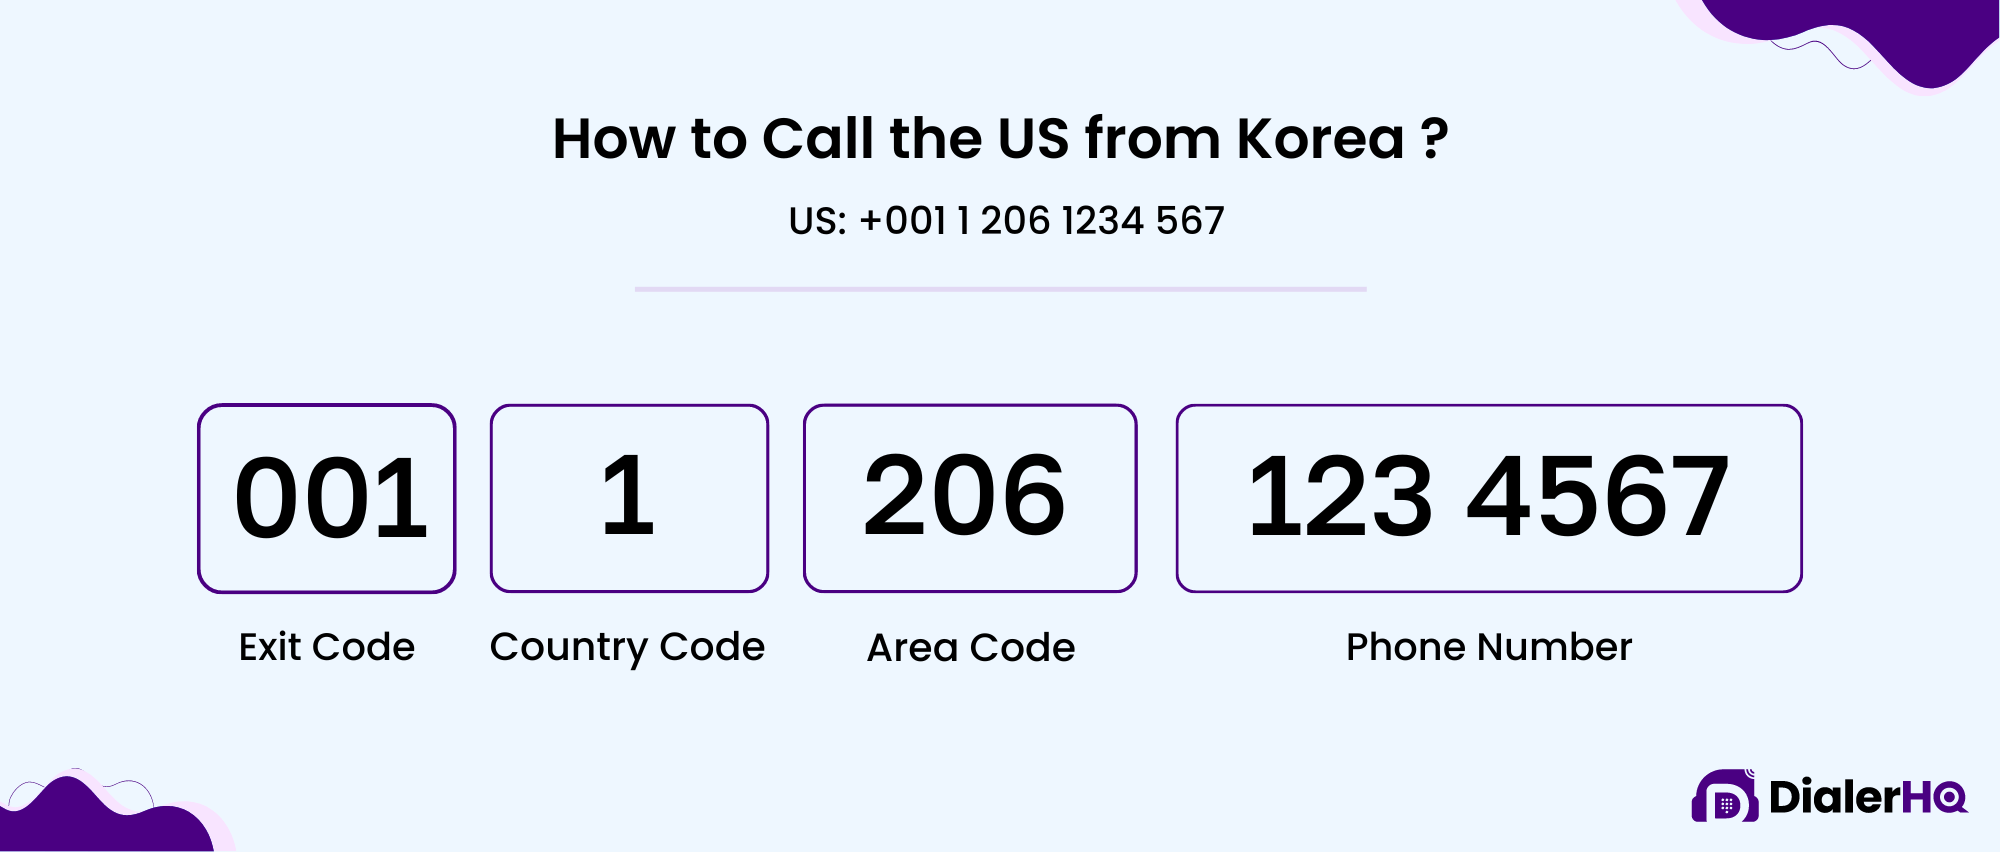 How to Call the US from Korea?